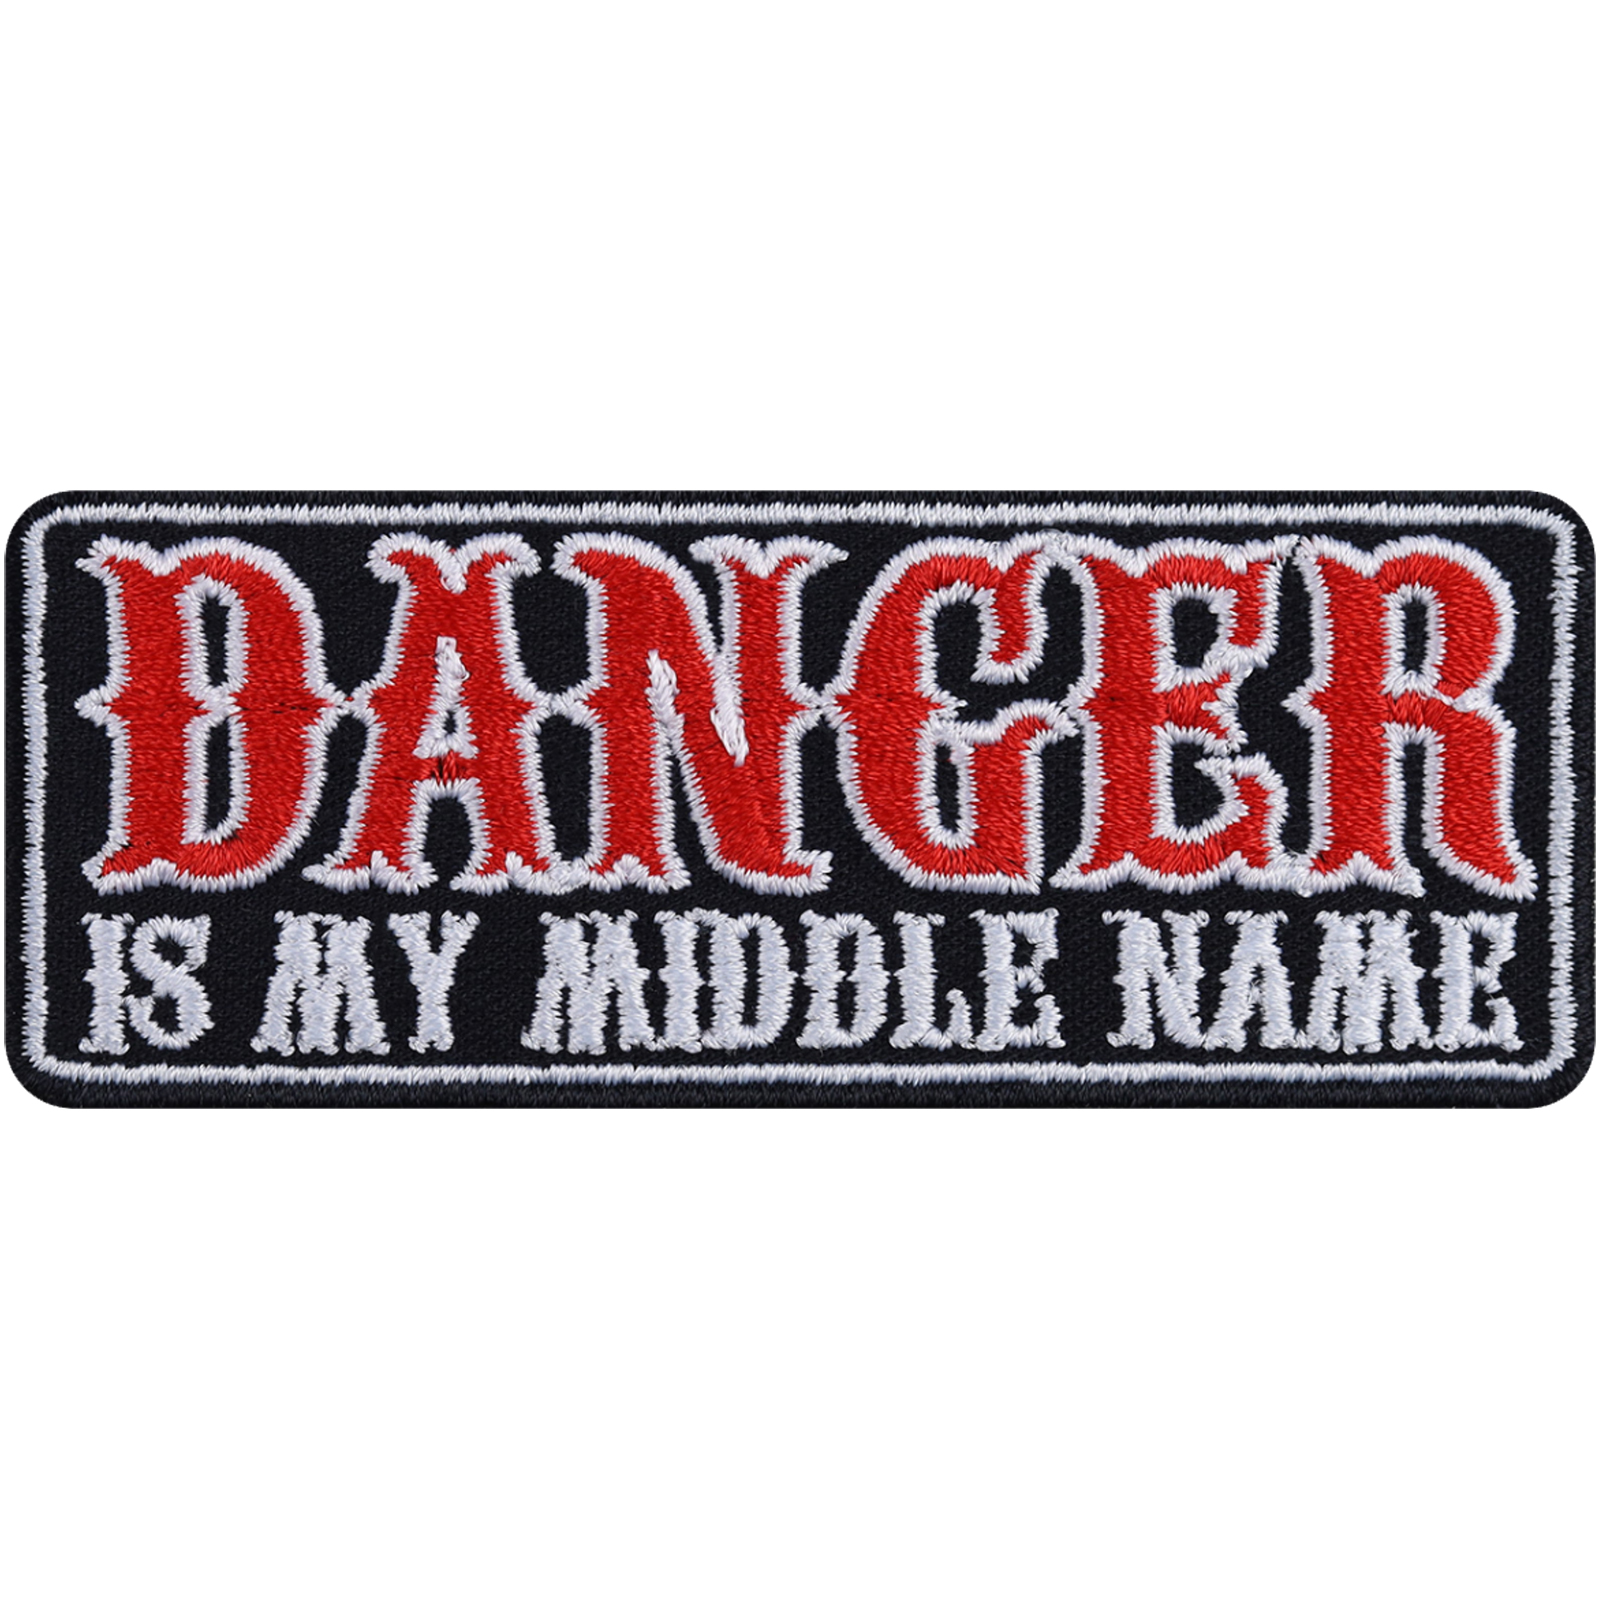 Danger is my middle name - Patch